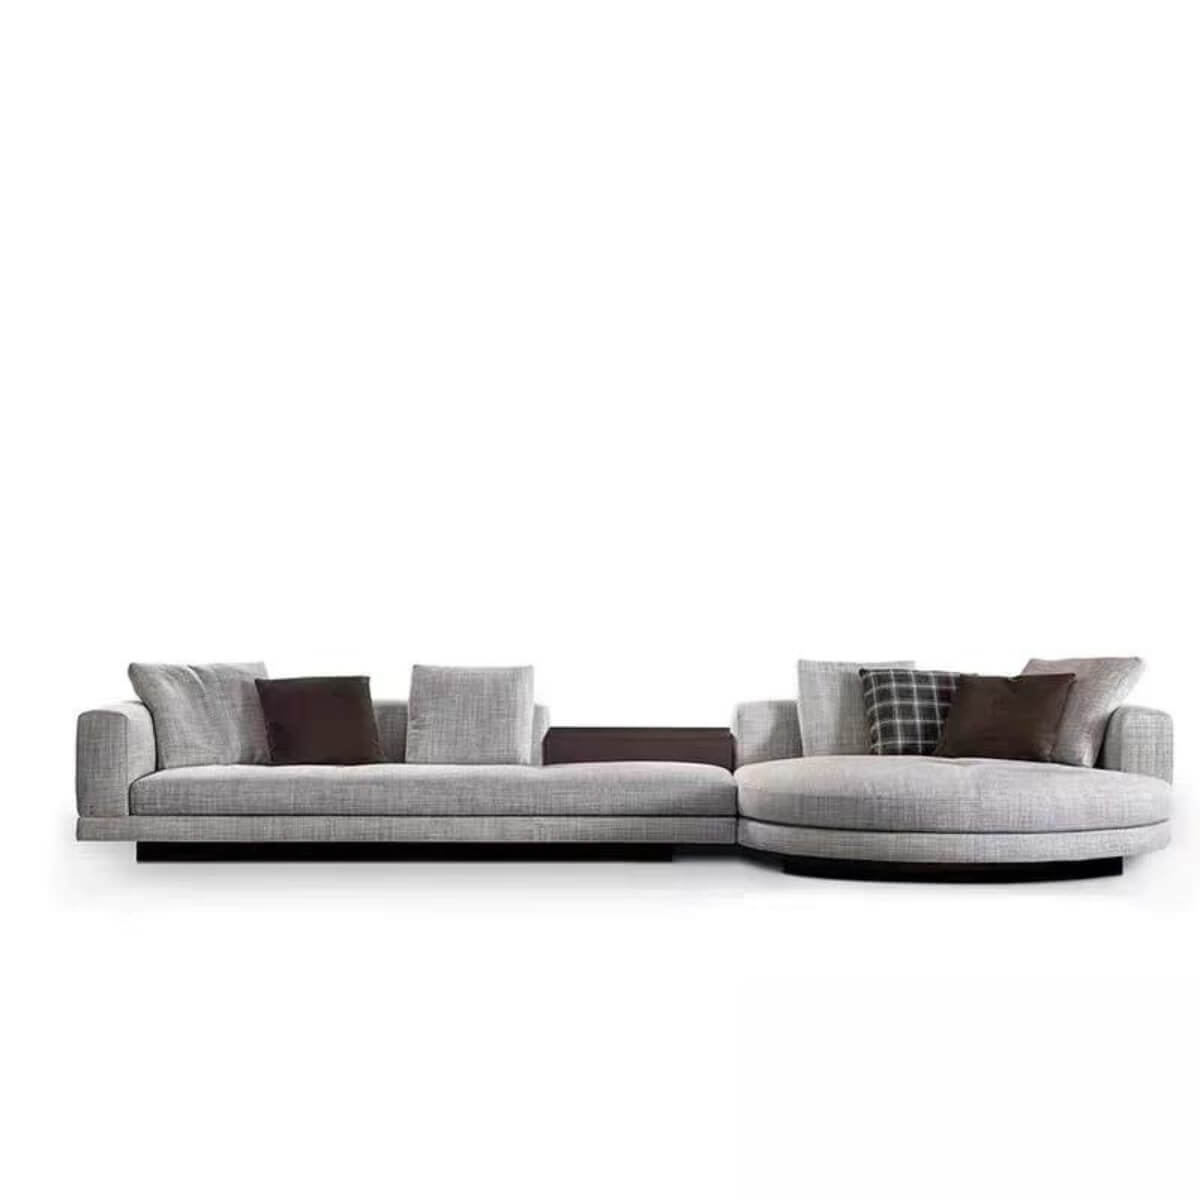 RadiantRealm Cotton Linen Sofa - Luxurious Comfort and Timeless Style